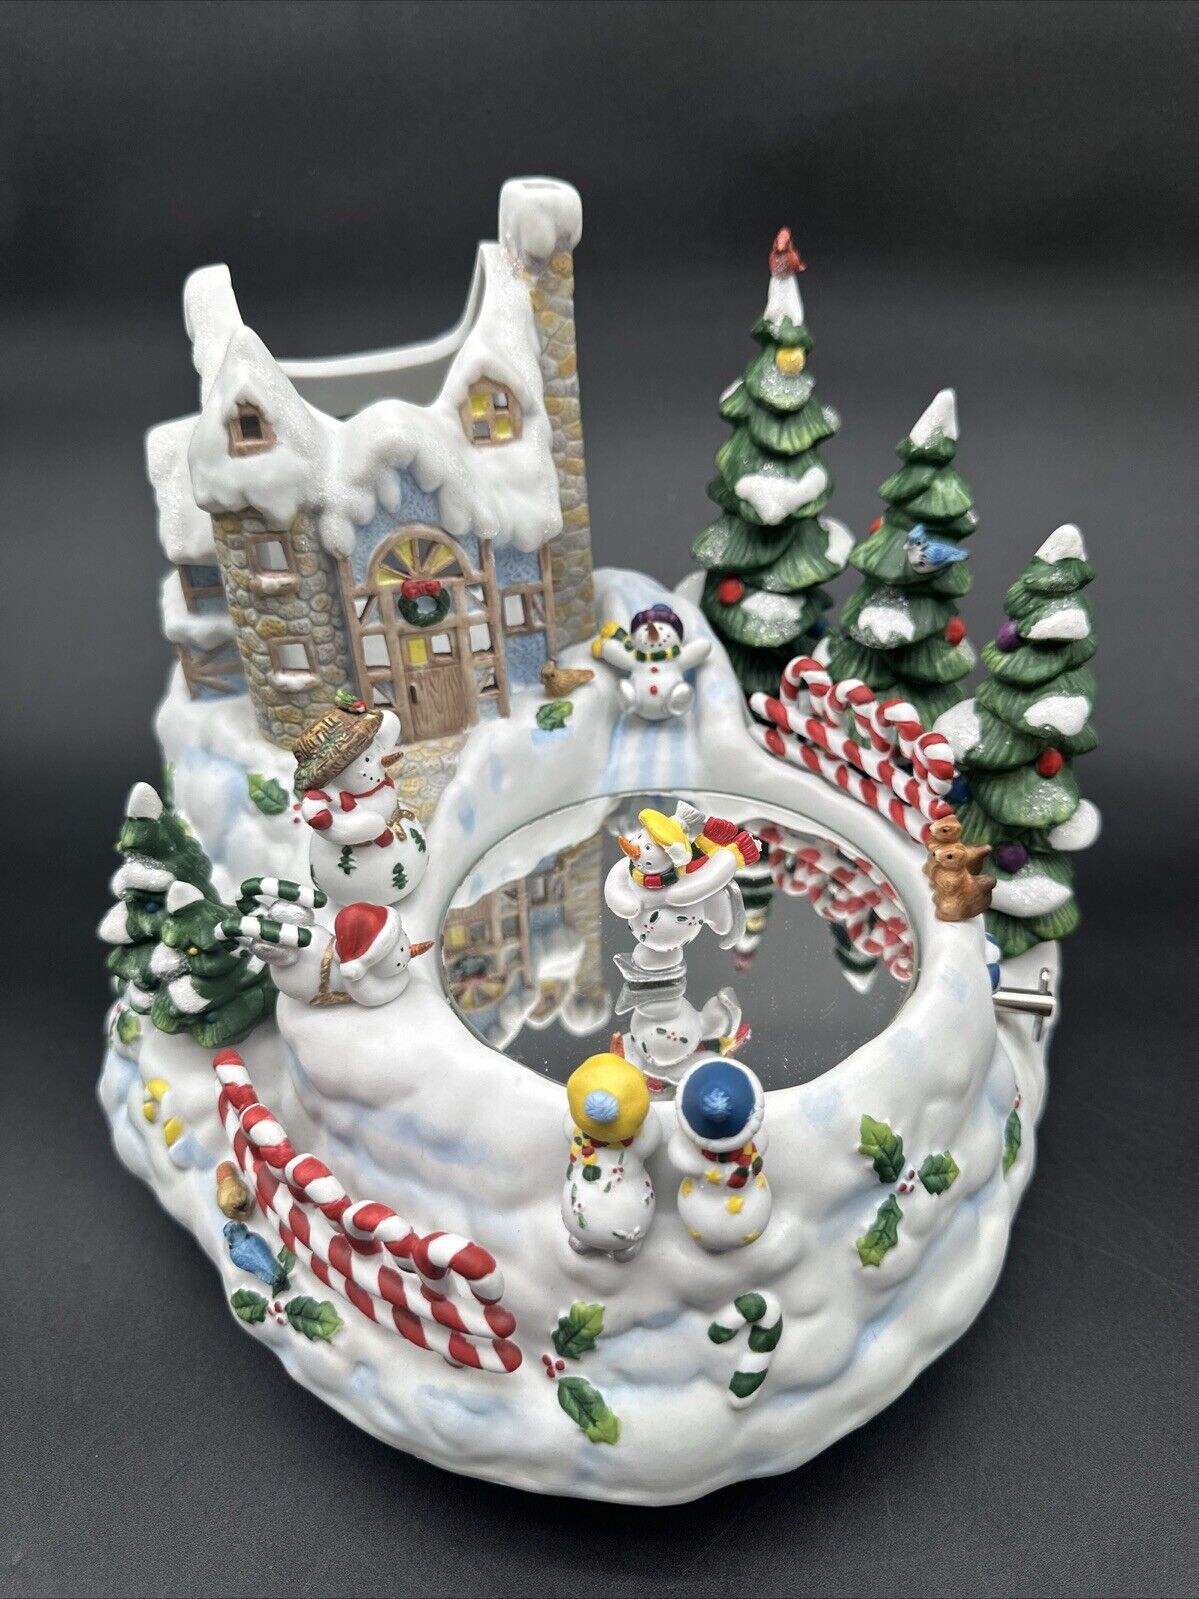 PartyLite Snowbell Candle Holder P7651 Snowman Musical Skating Rink Motion W/Box